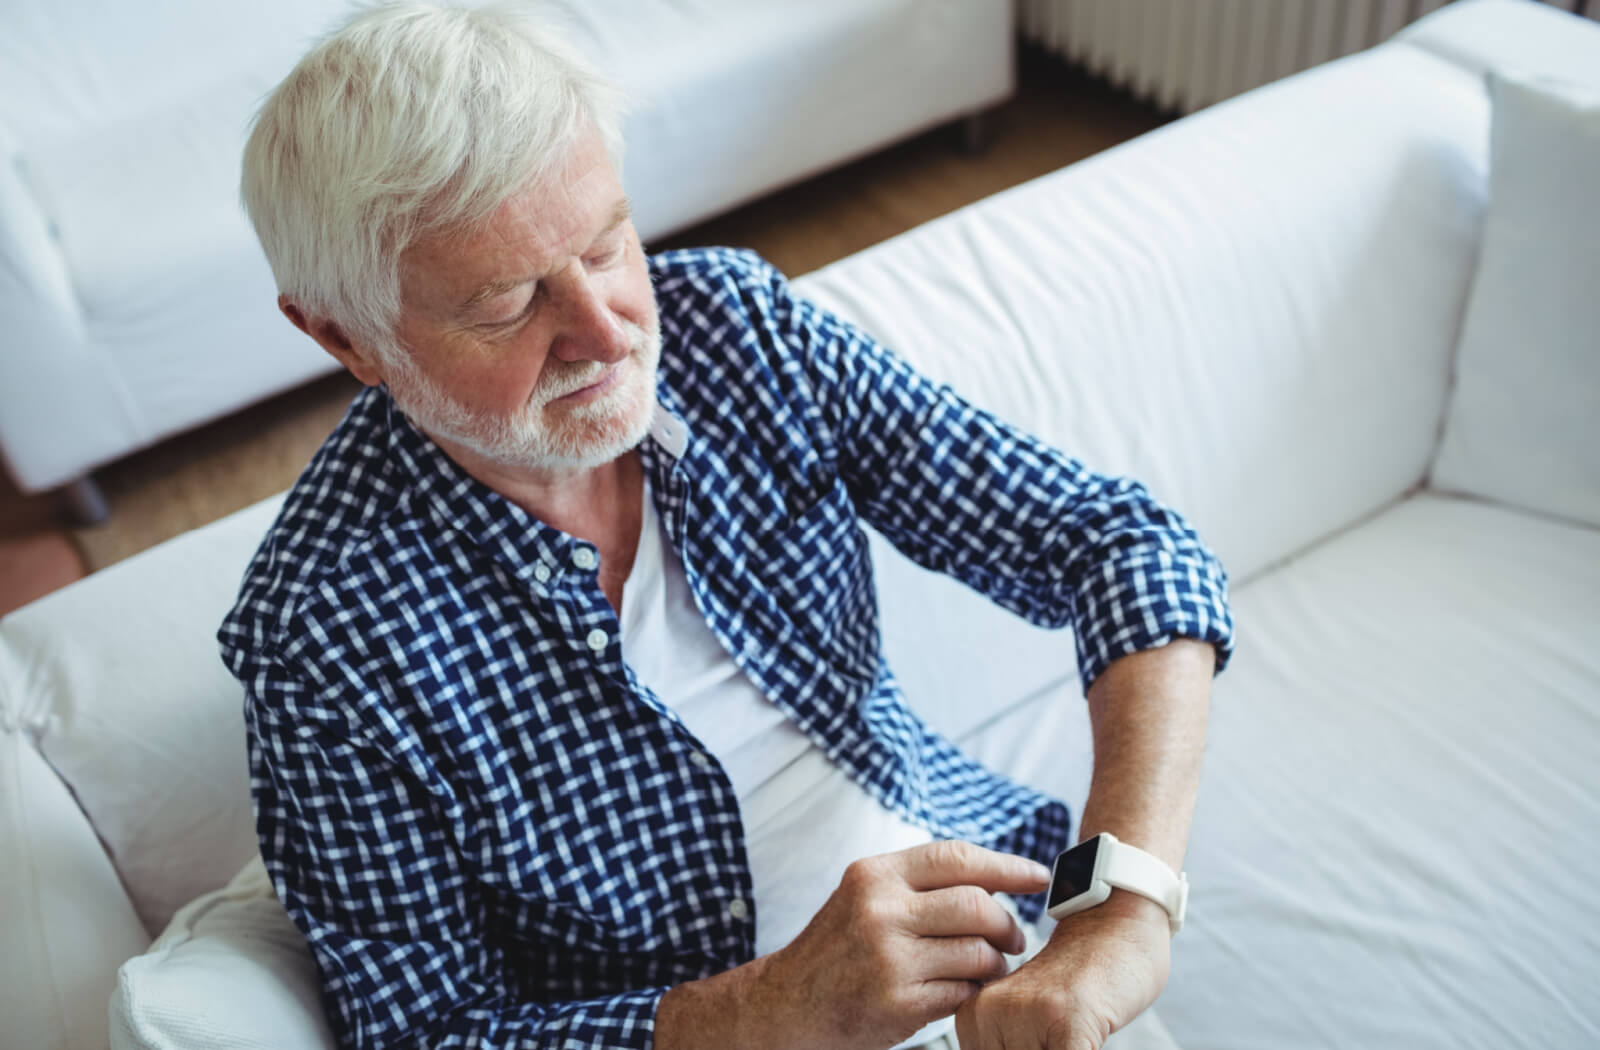 A senior man sitting on a couch and adjusting the time on his smartwatch.